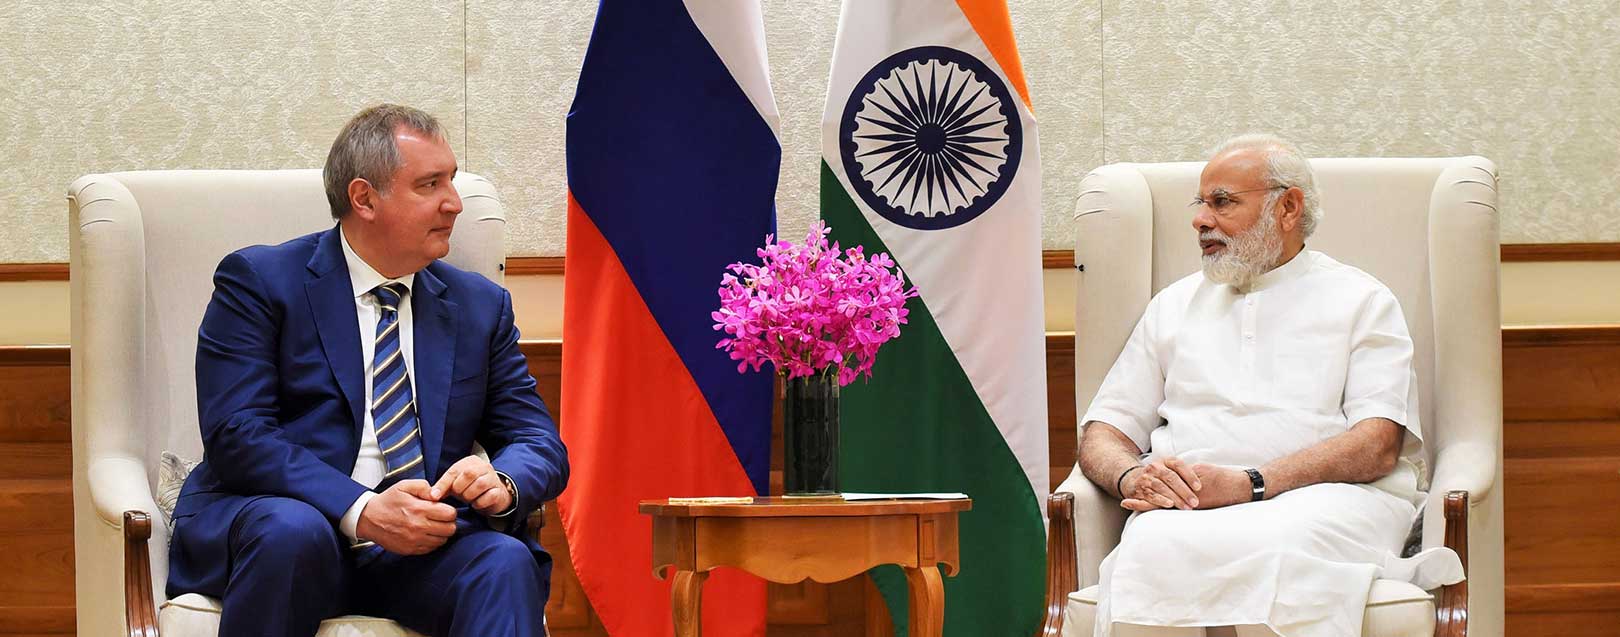 India, Russia review joint projects before Modi-Putin summit